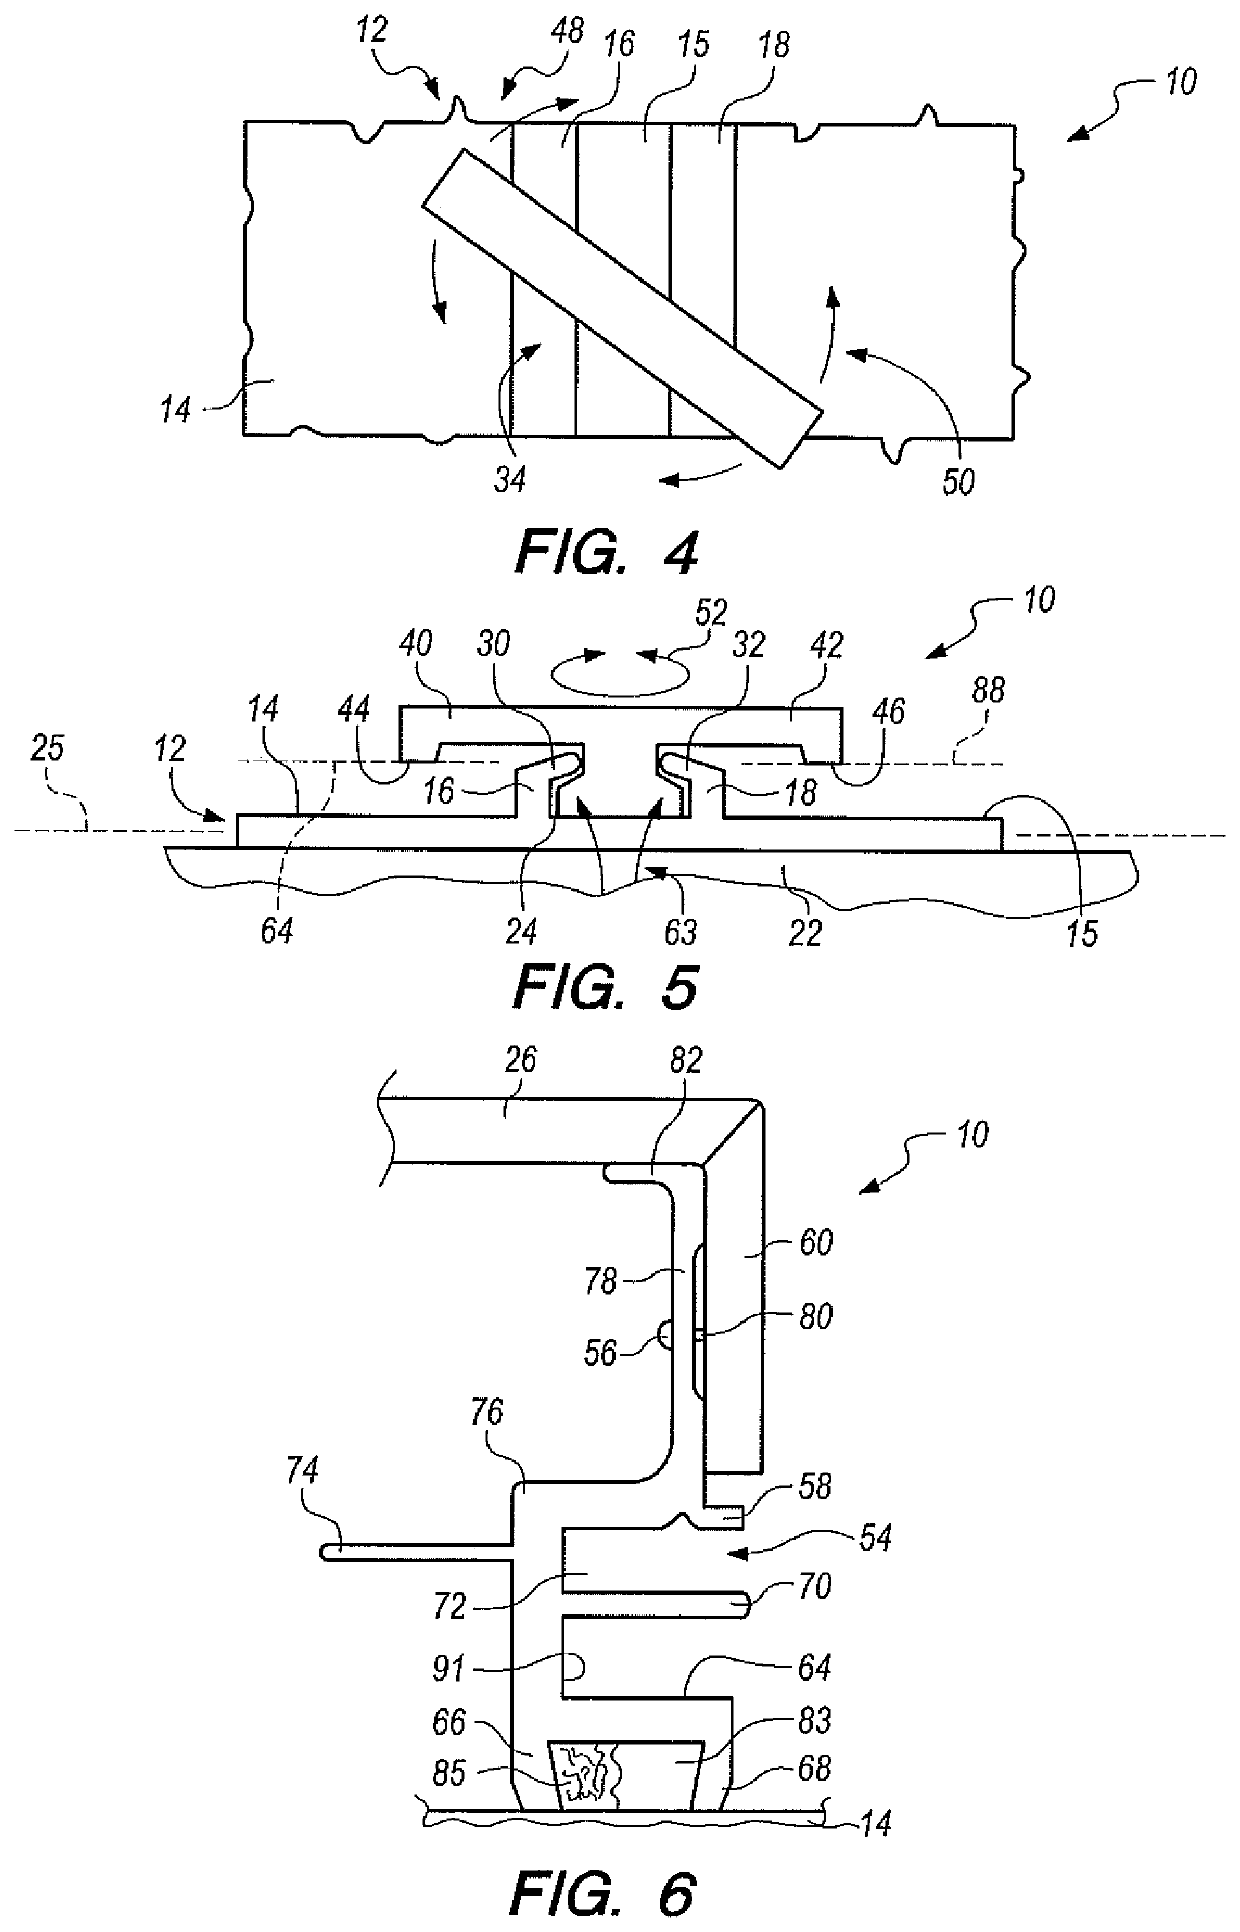 Apparatus for attaching an insulated panel to a facade